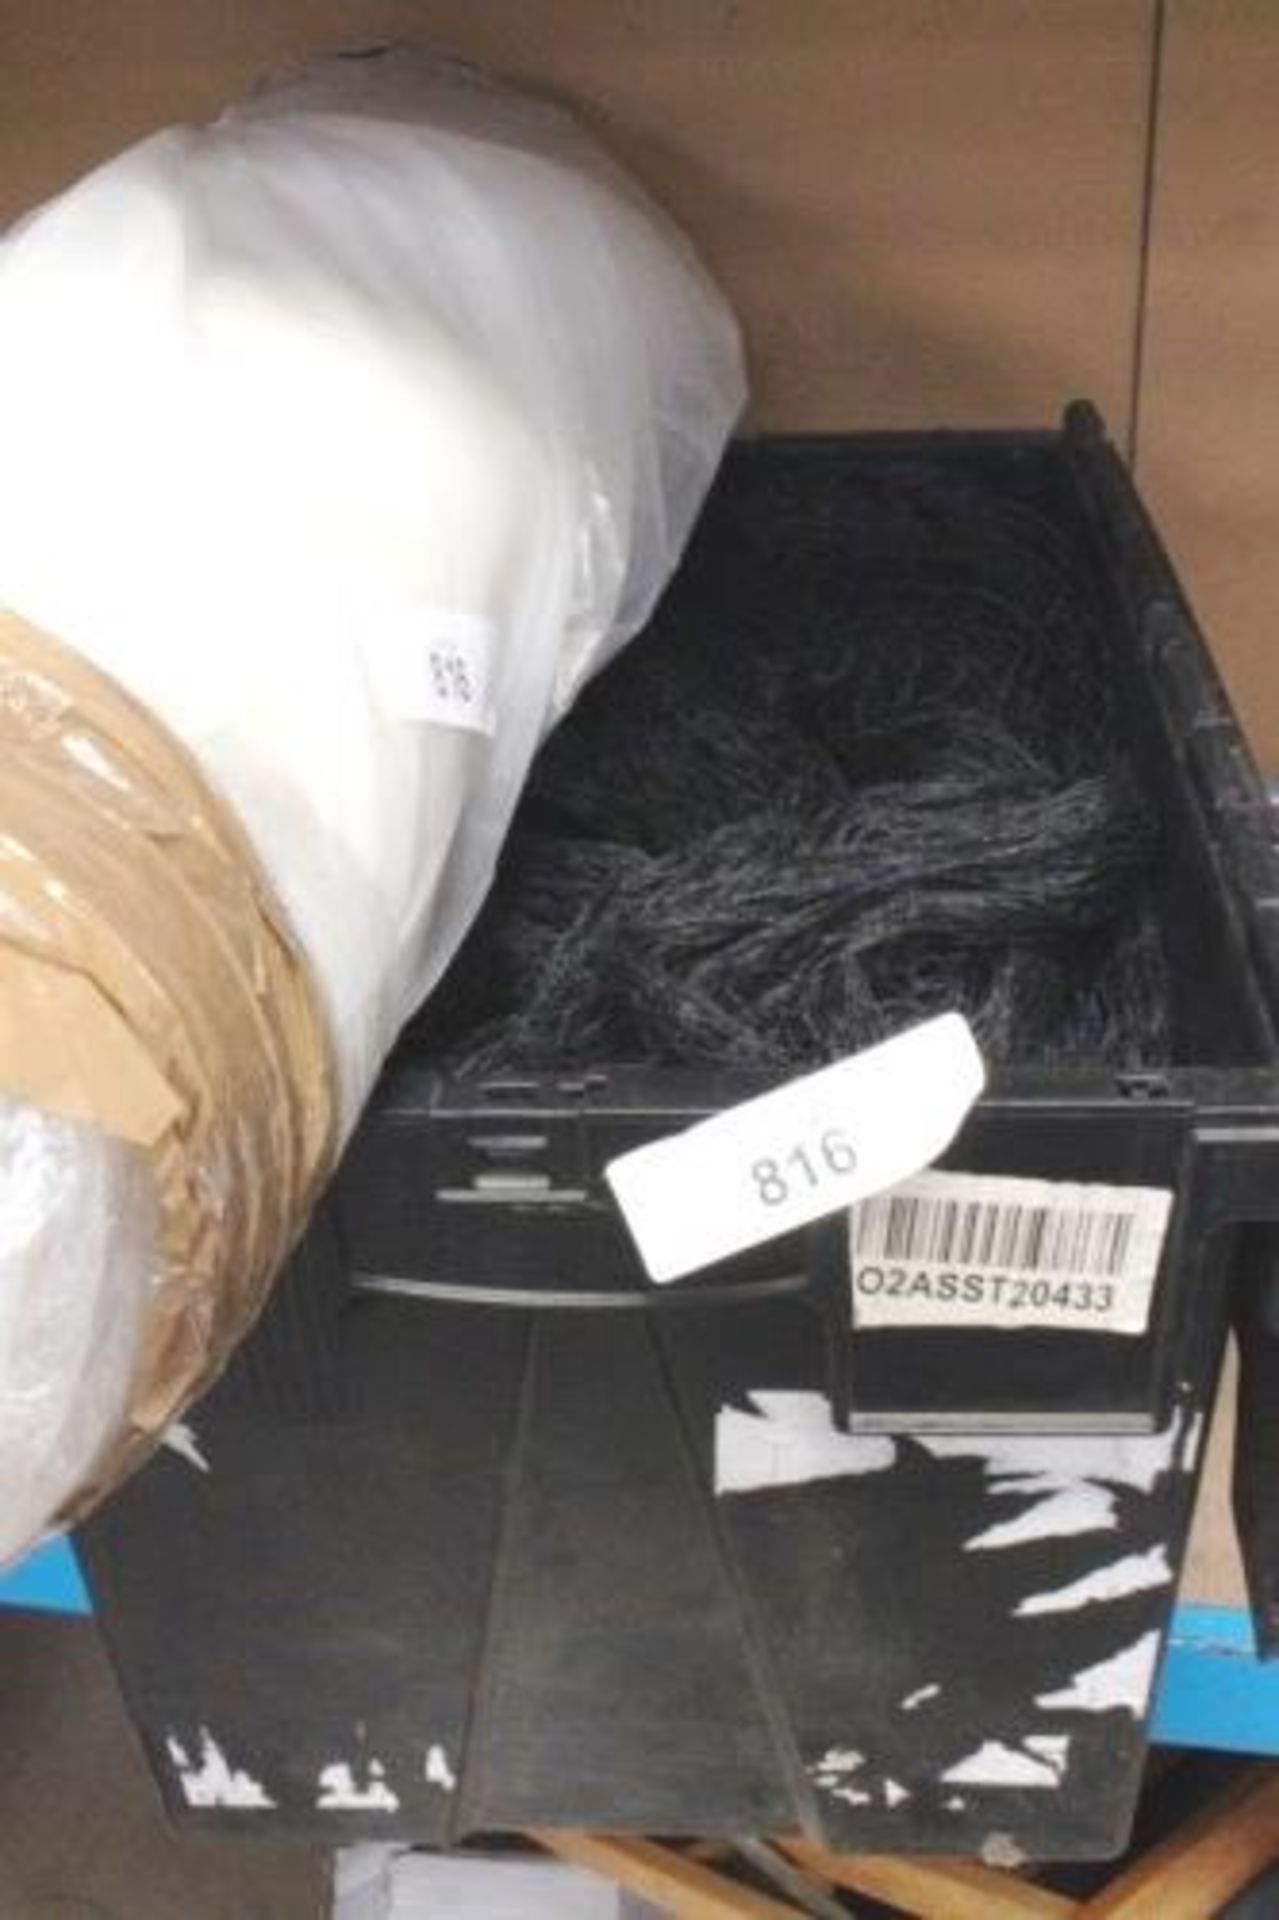 A quantity of black fruit tree netting and a length of white netting (esb10)